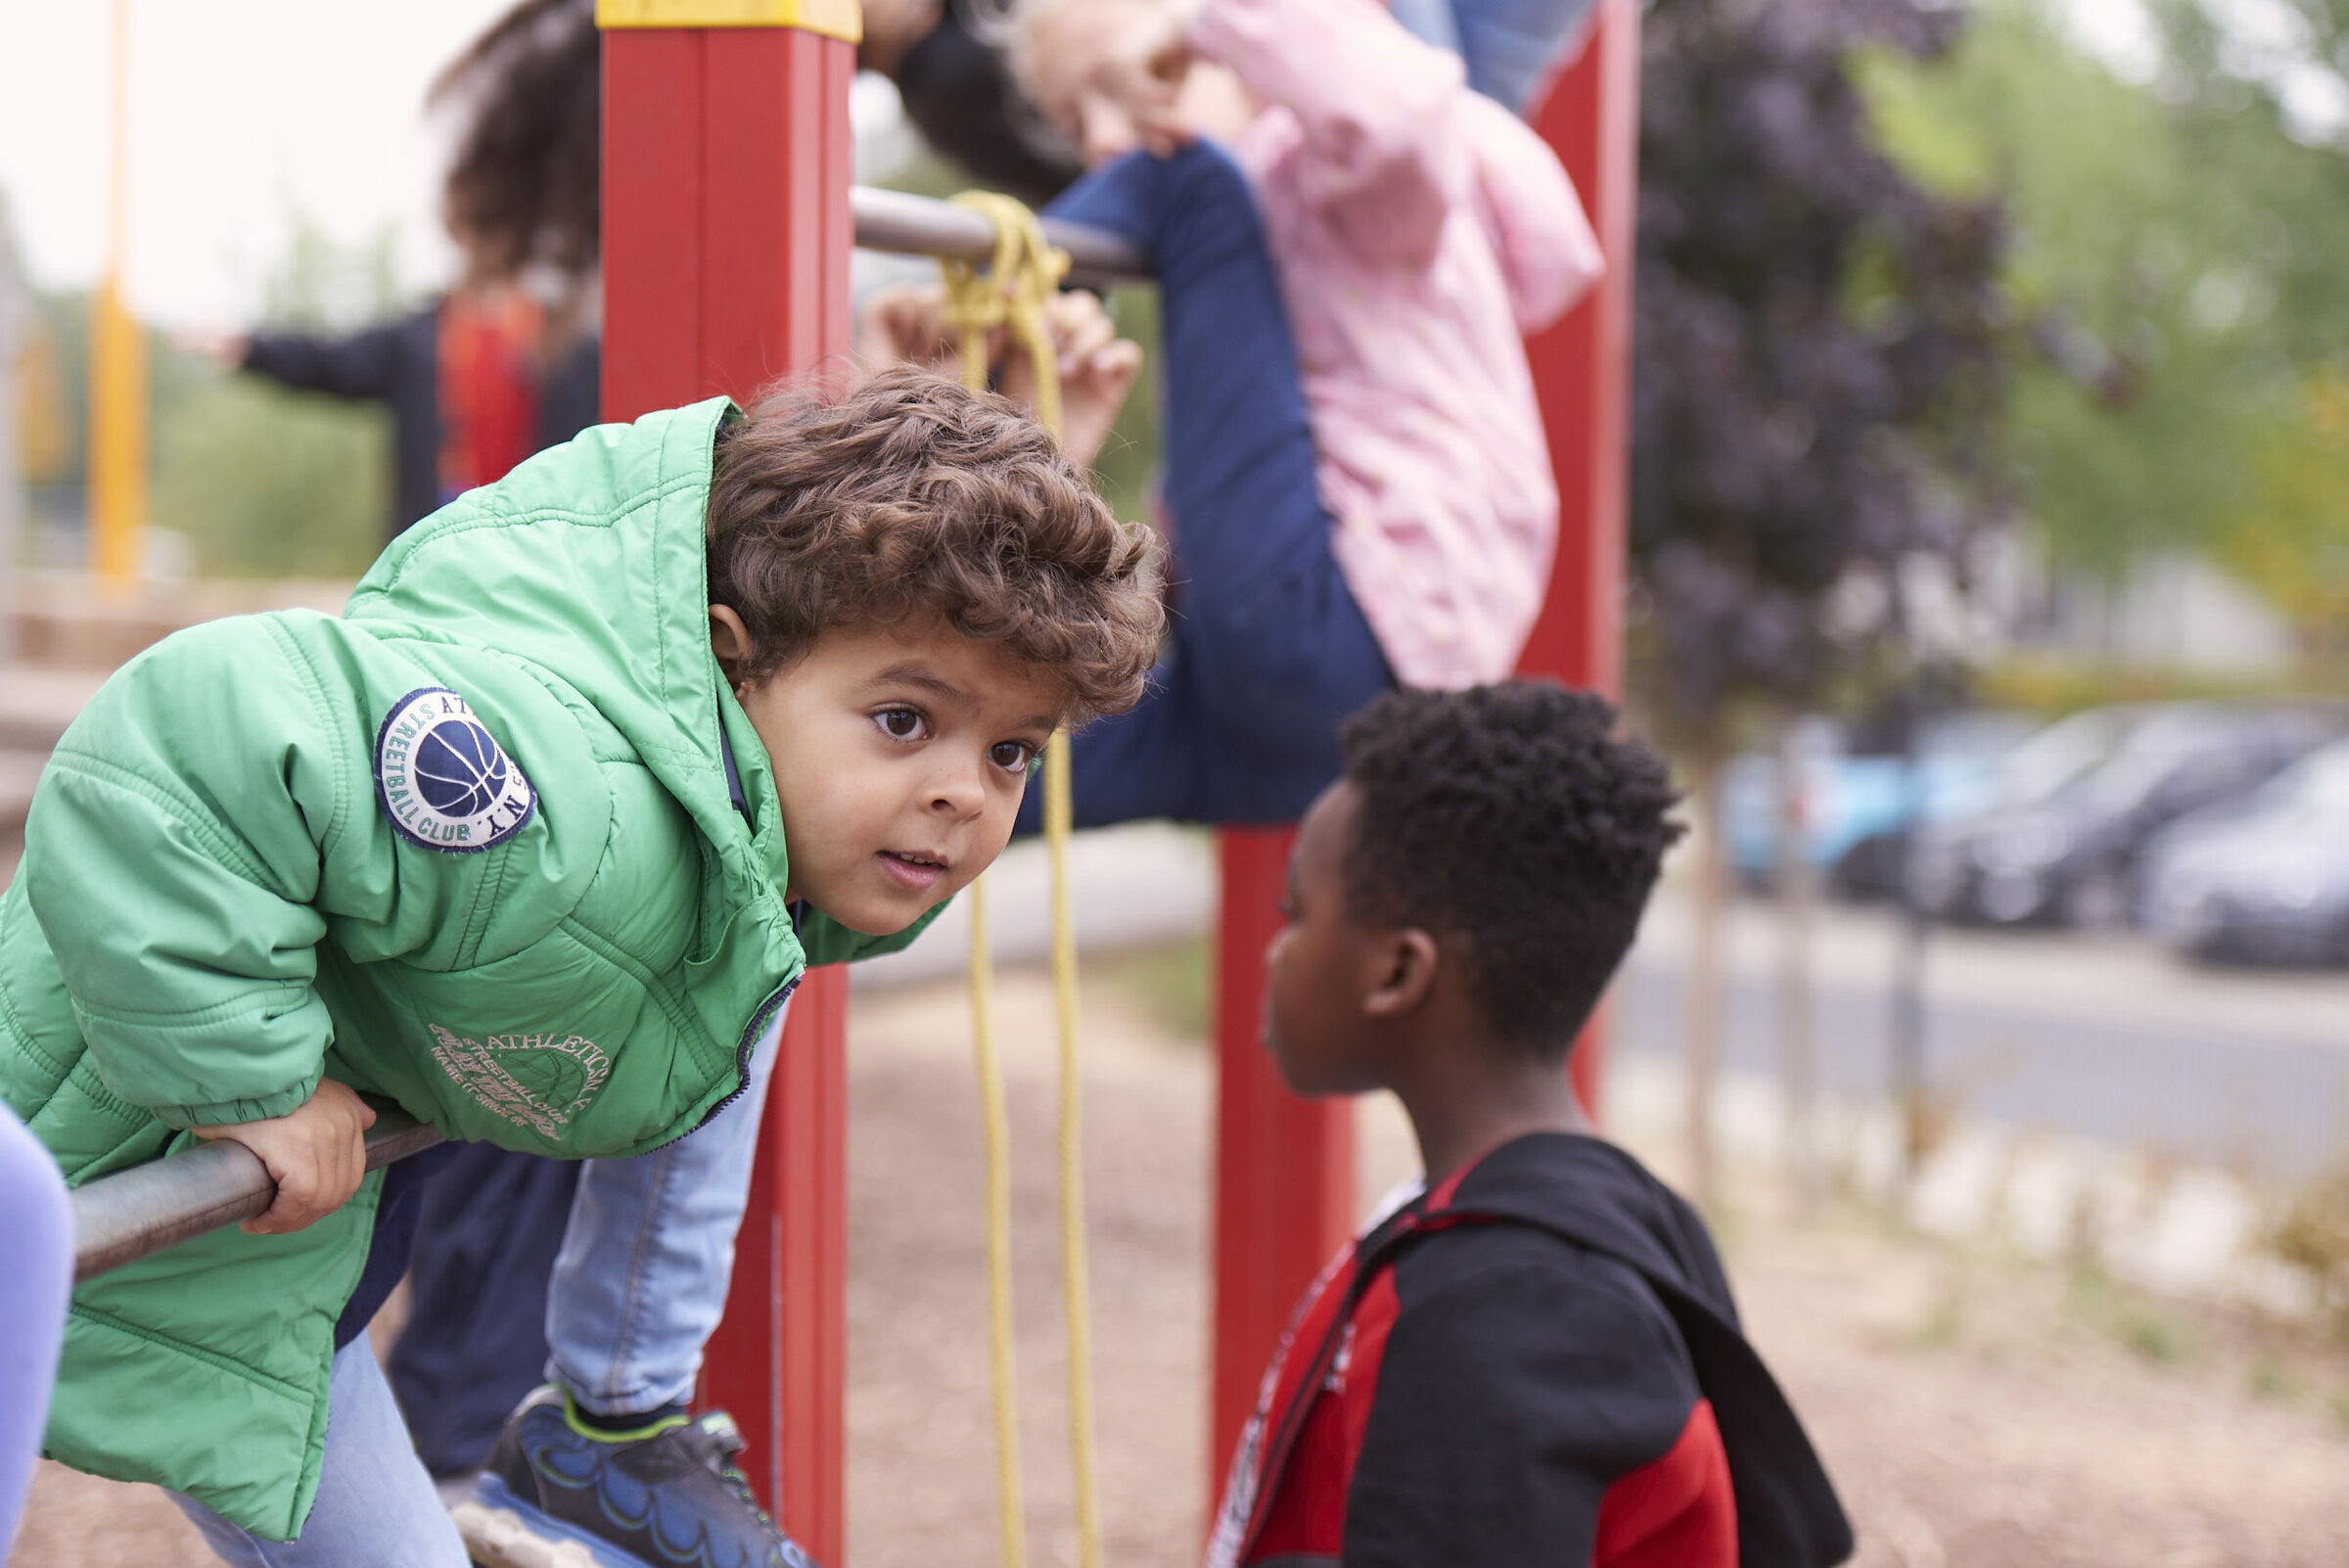 Children on the playground. A boy leans on a horizontal bar.